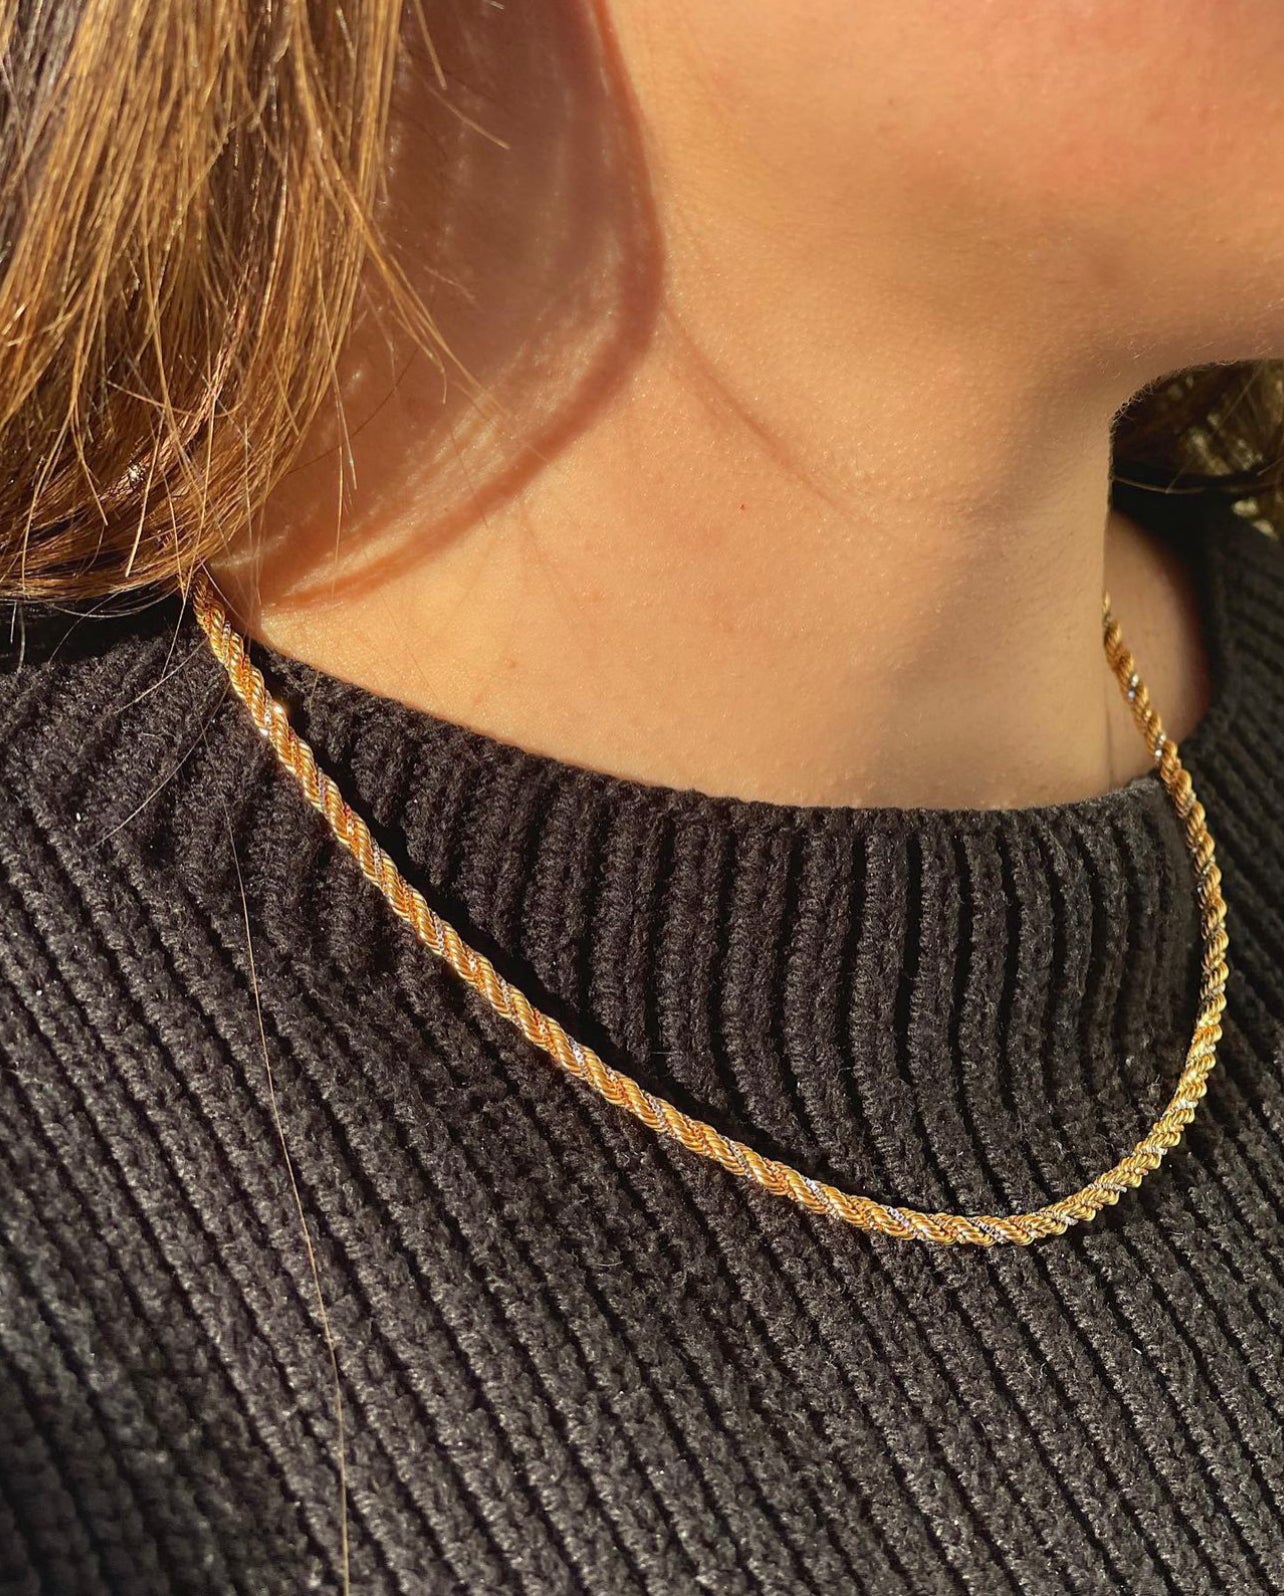 18K Tri-Color Rope and Box Chain Necklace